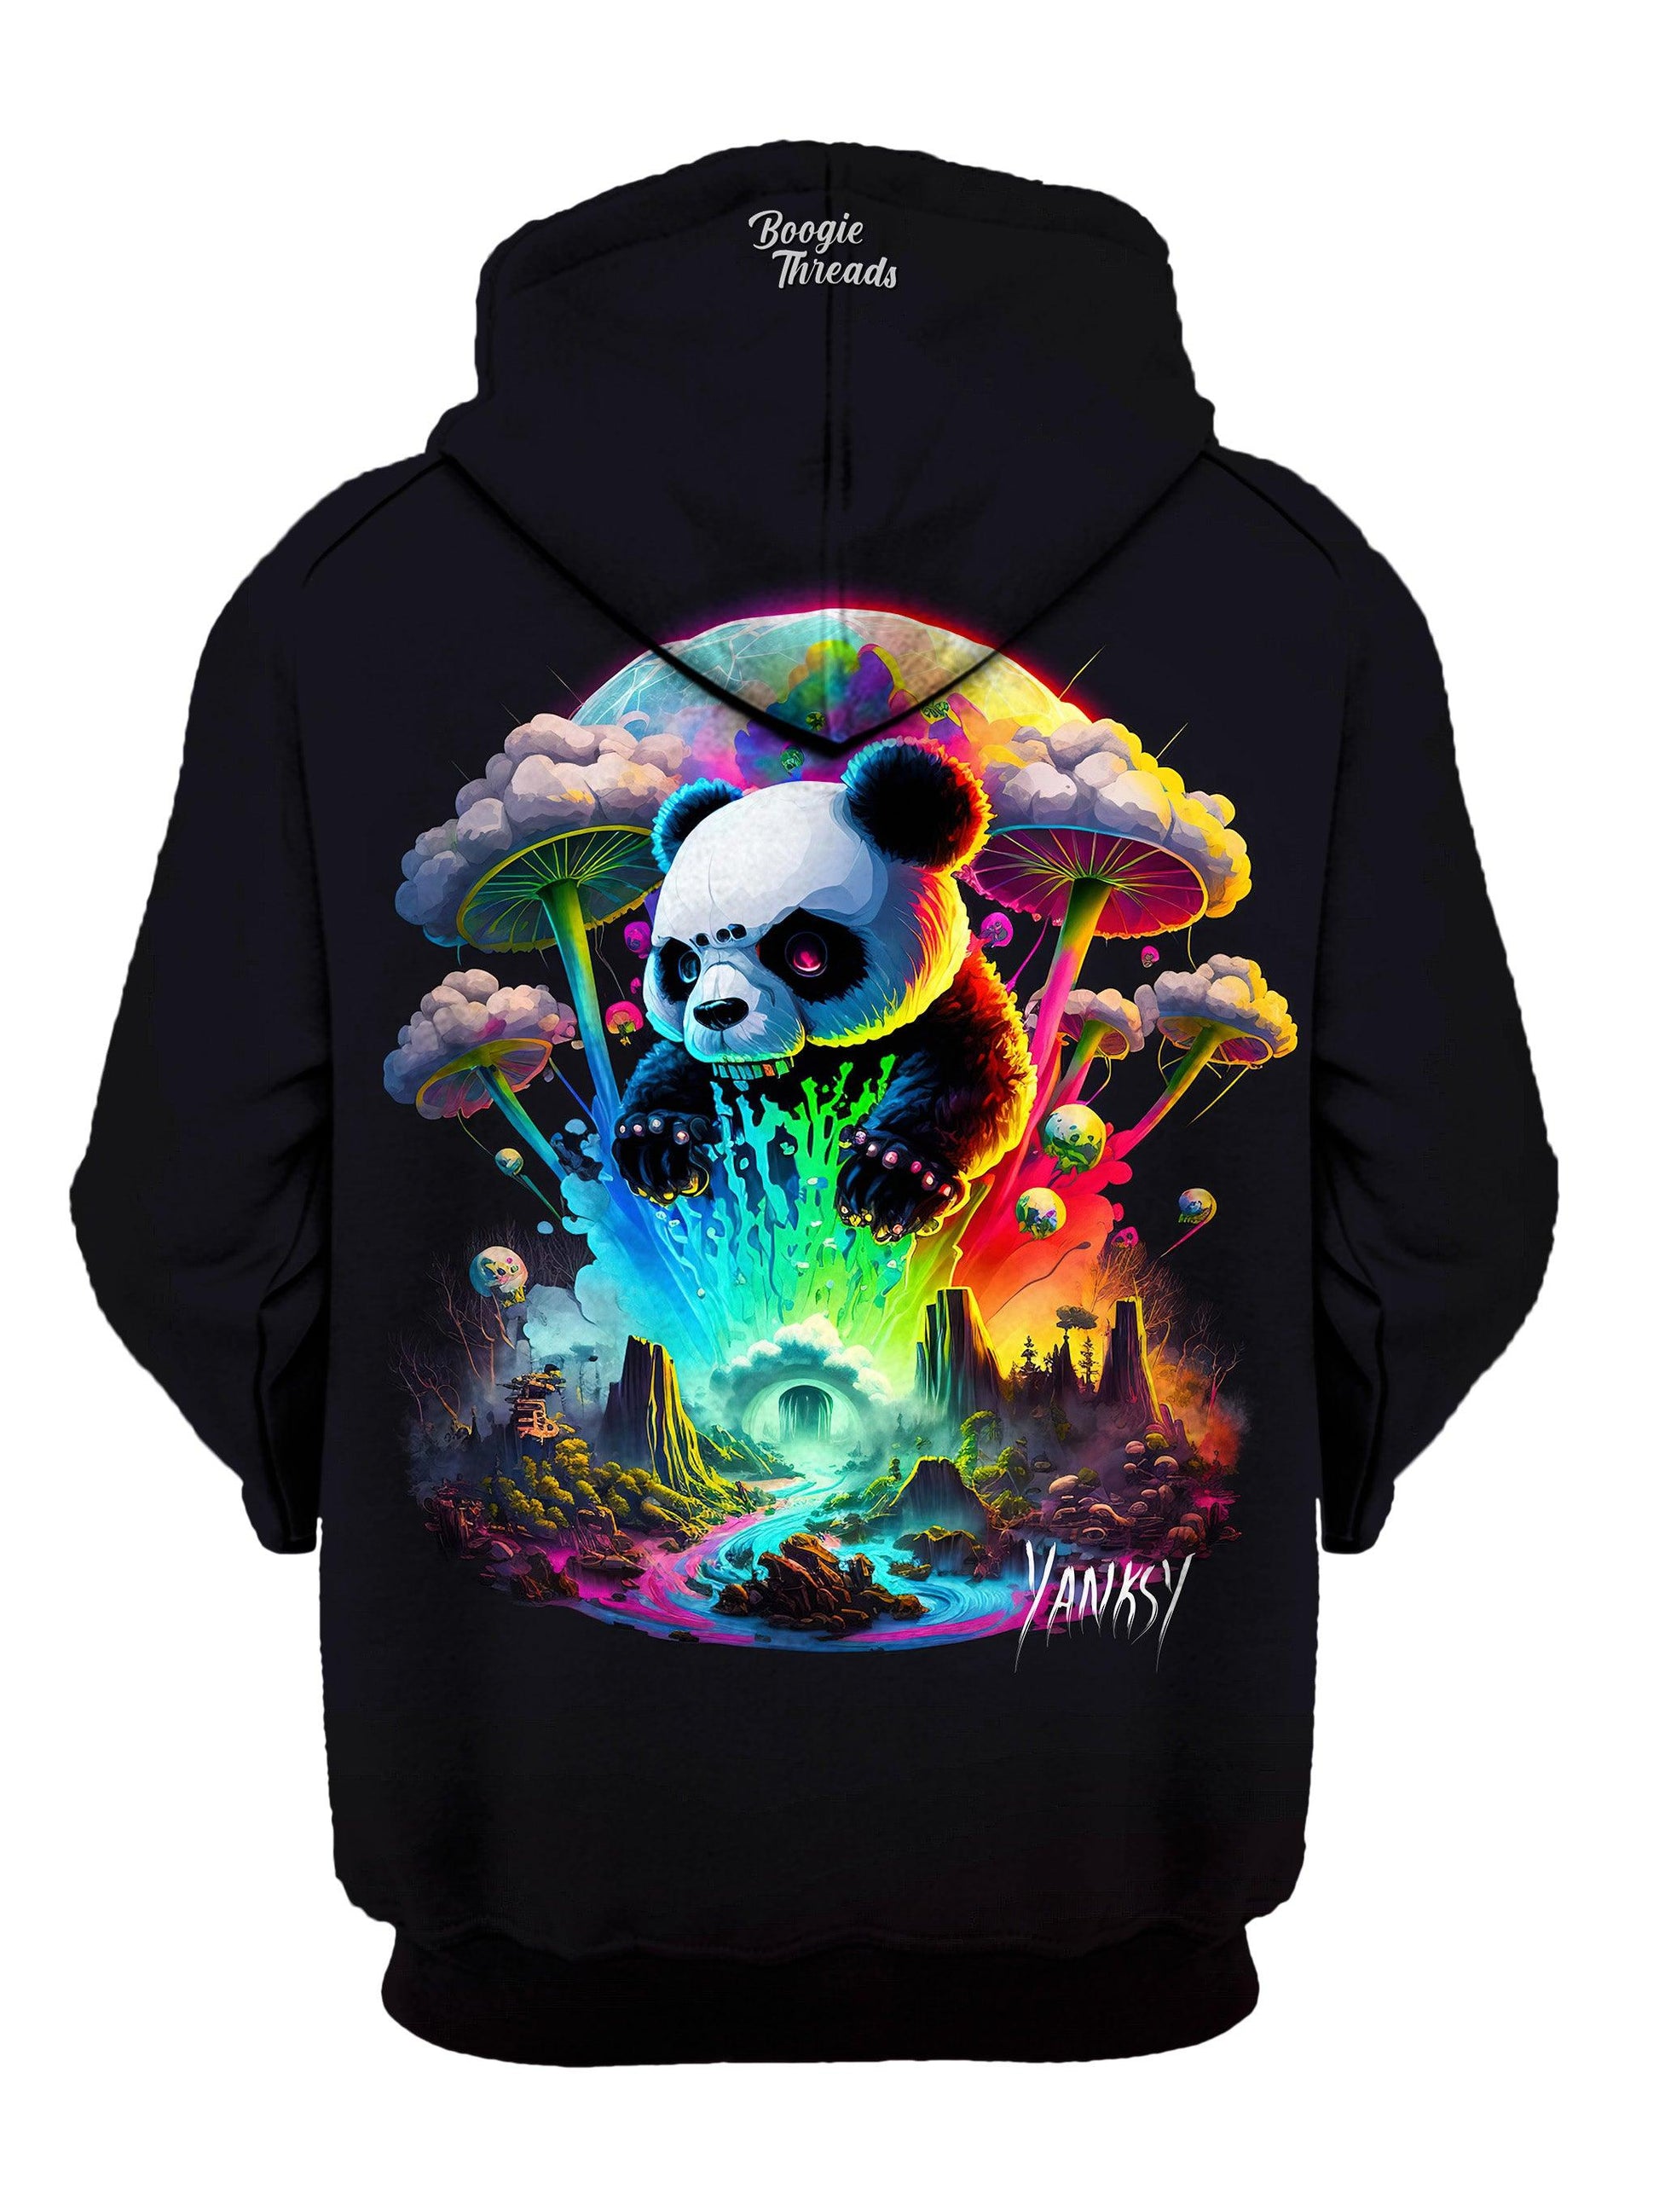 Get ready to dance the night away in this comfortable pullover hoodie